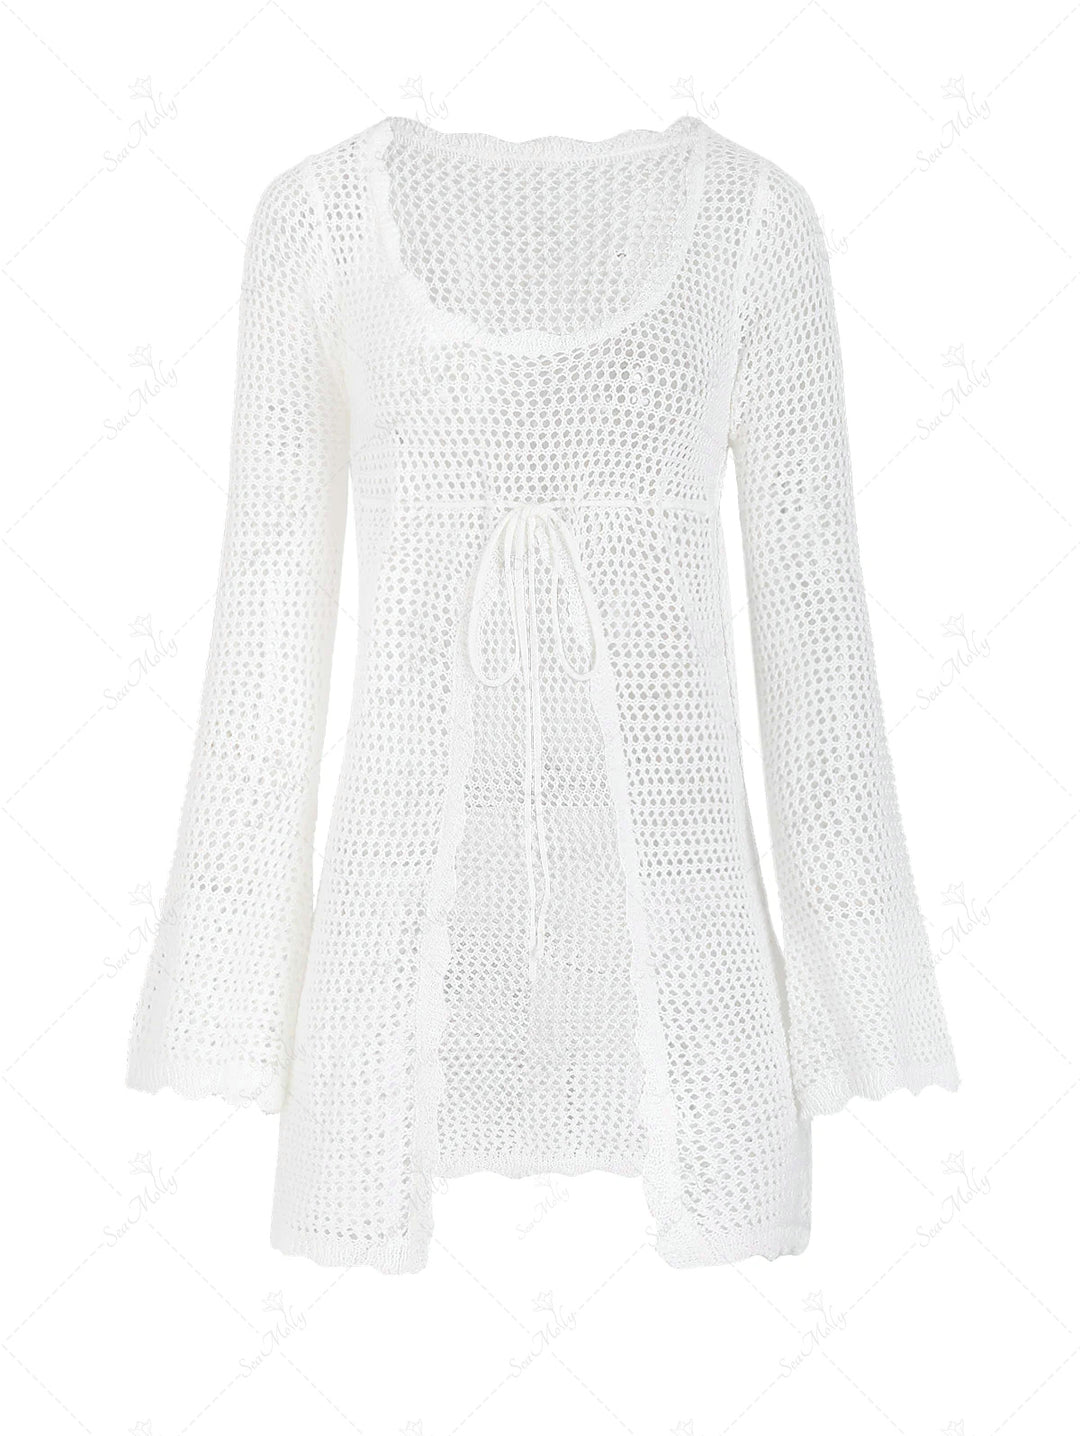 Openwork Crochet See Thru Scalloped Long Flare Sleeve Beach Cover Up Top